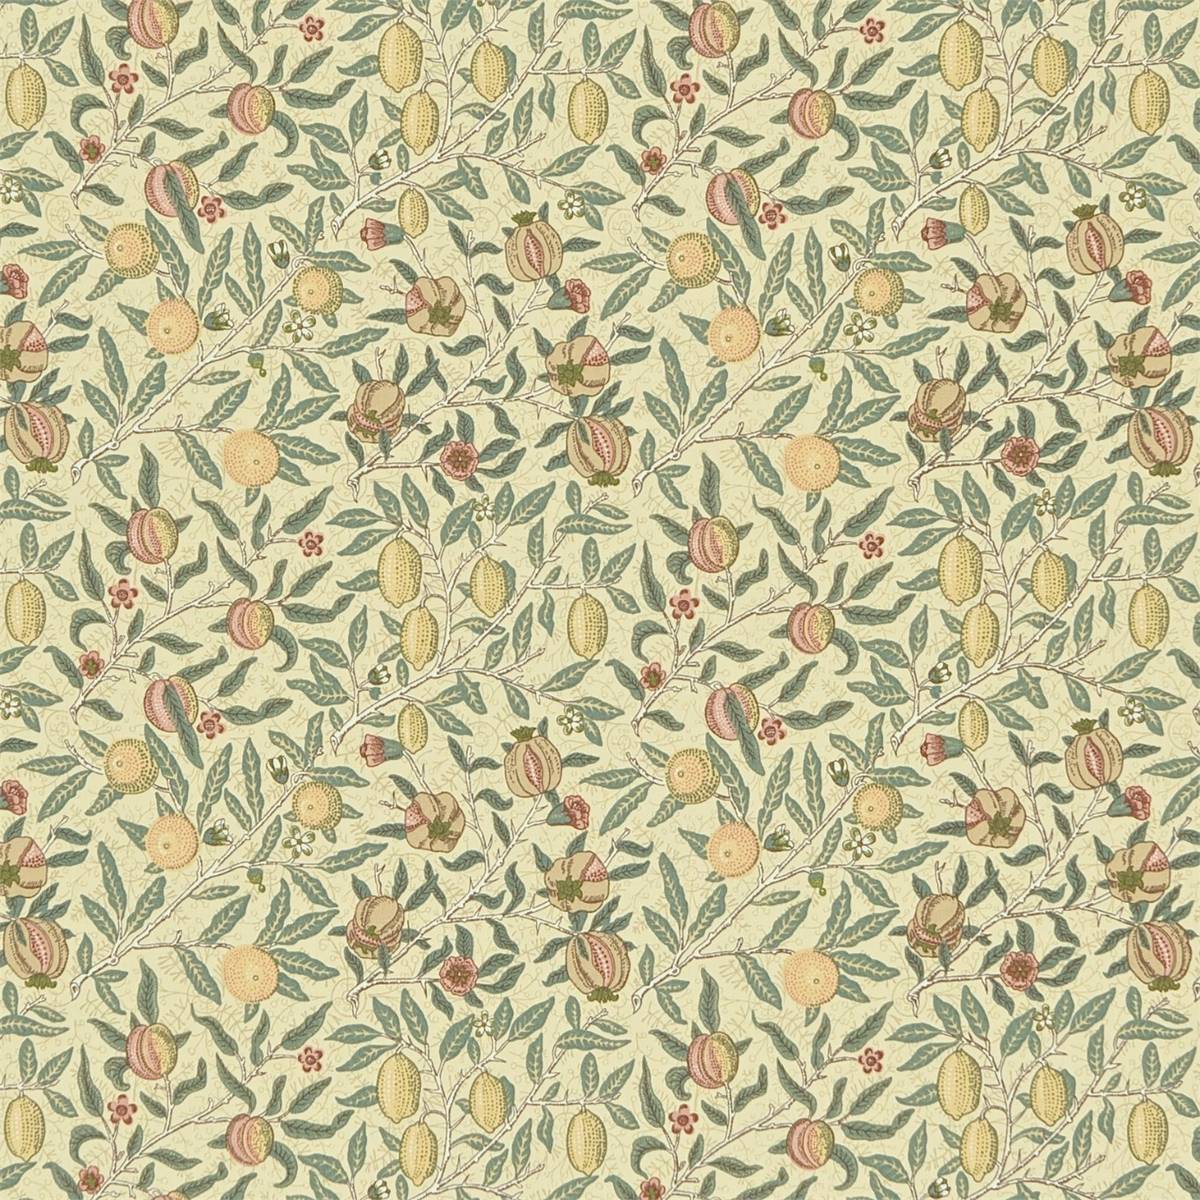 Fruit Minor Ivory/Teal Fabric by William Morris & Co.